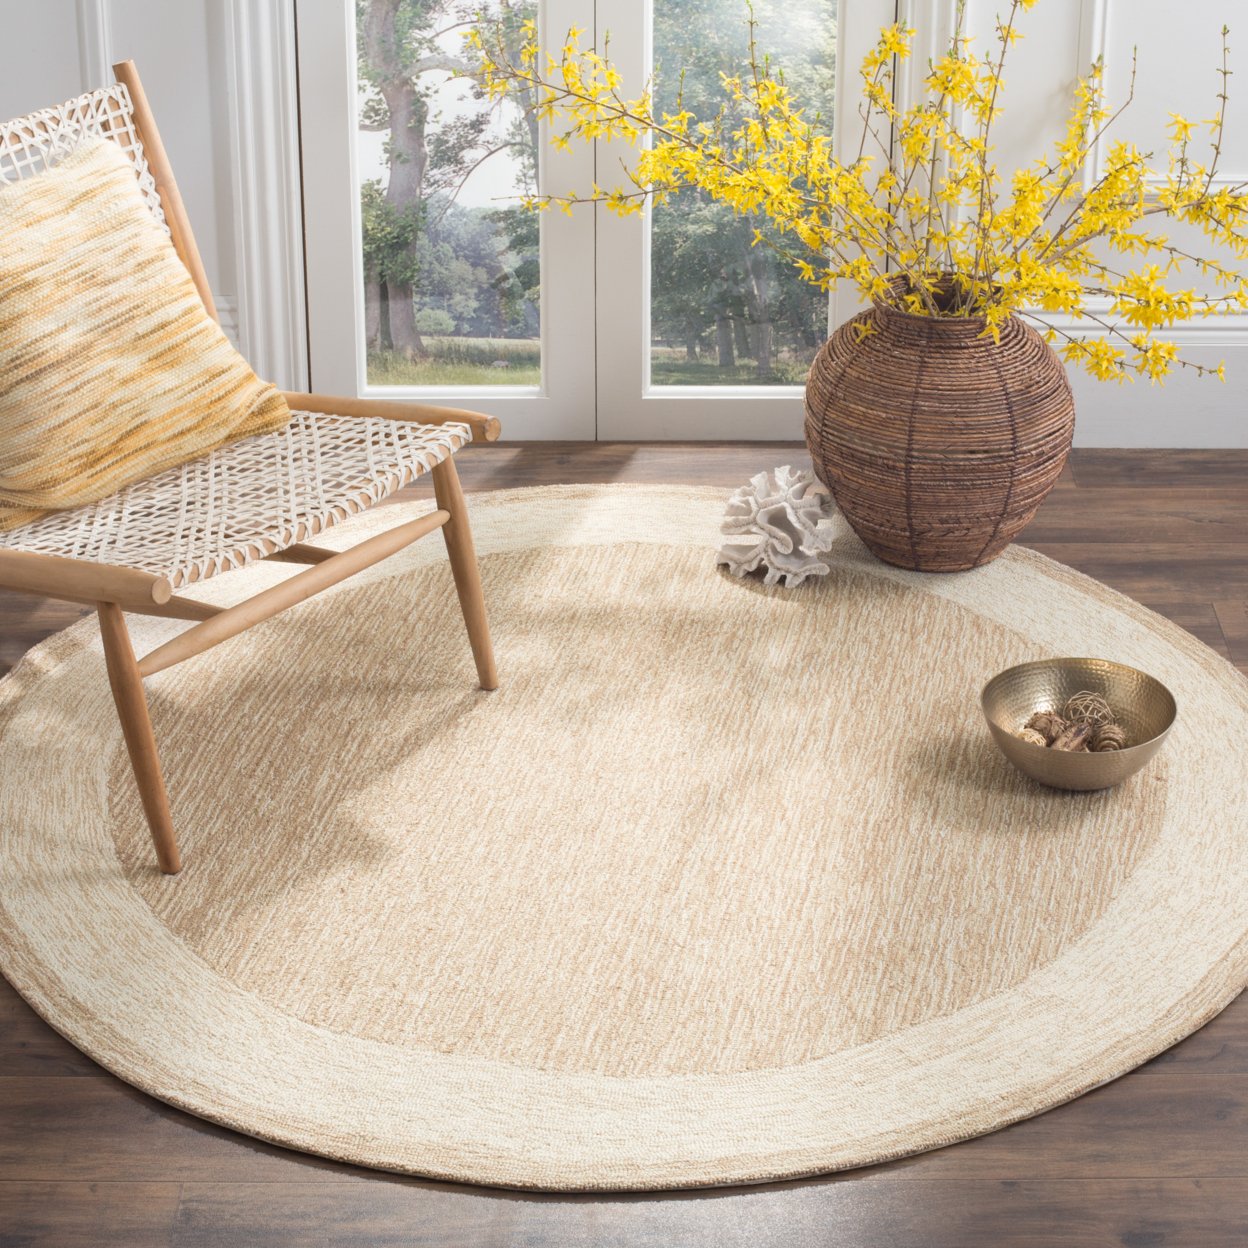 SAFAVIEH Easy Care EZC427A Hand-hooked Natural Rug - 6' Round